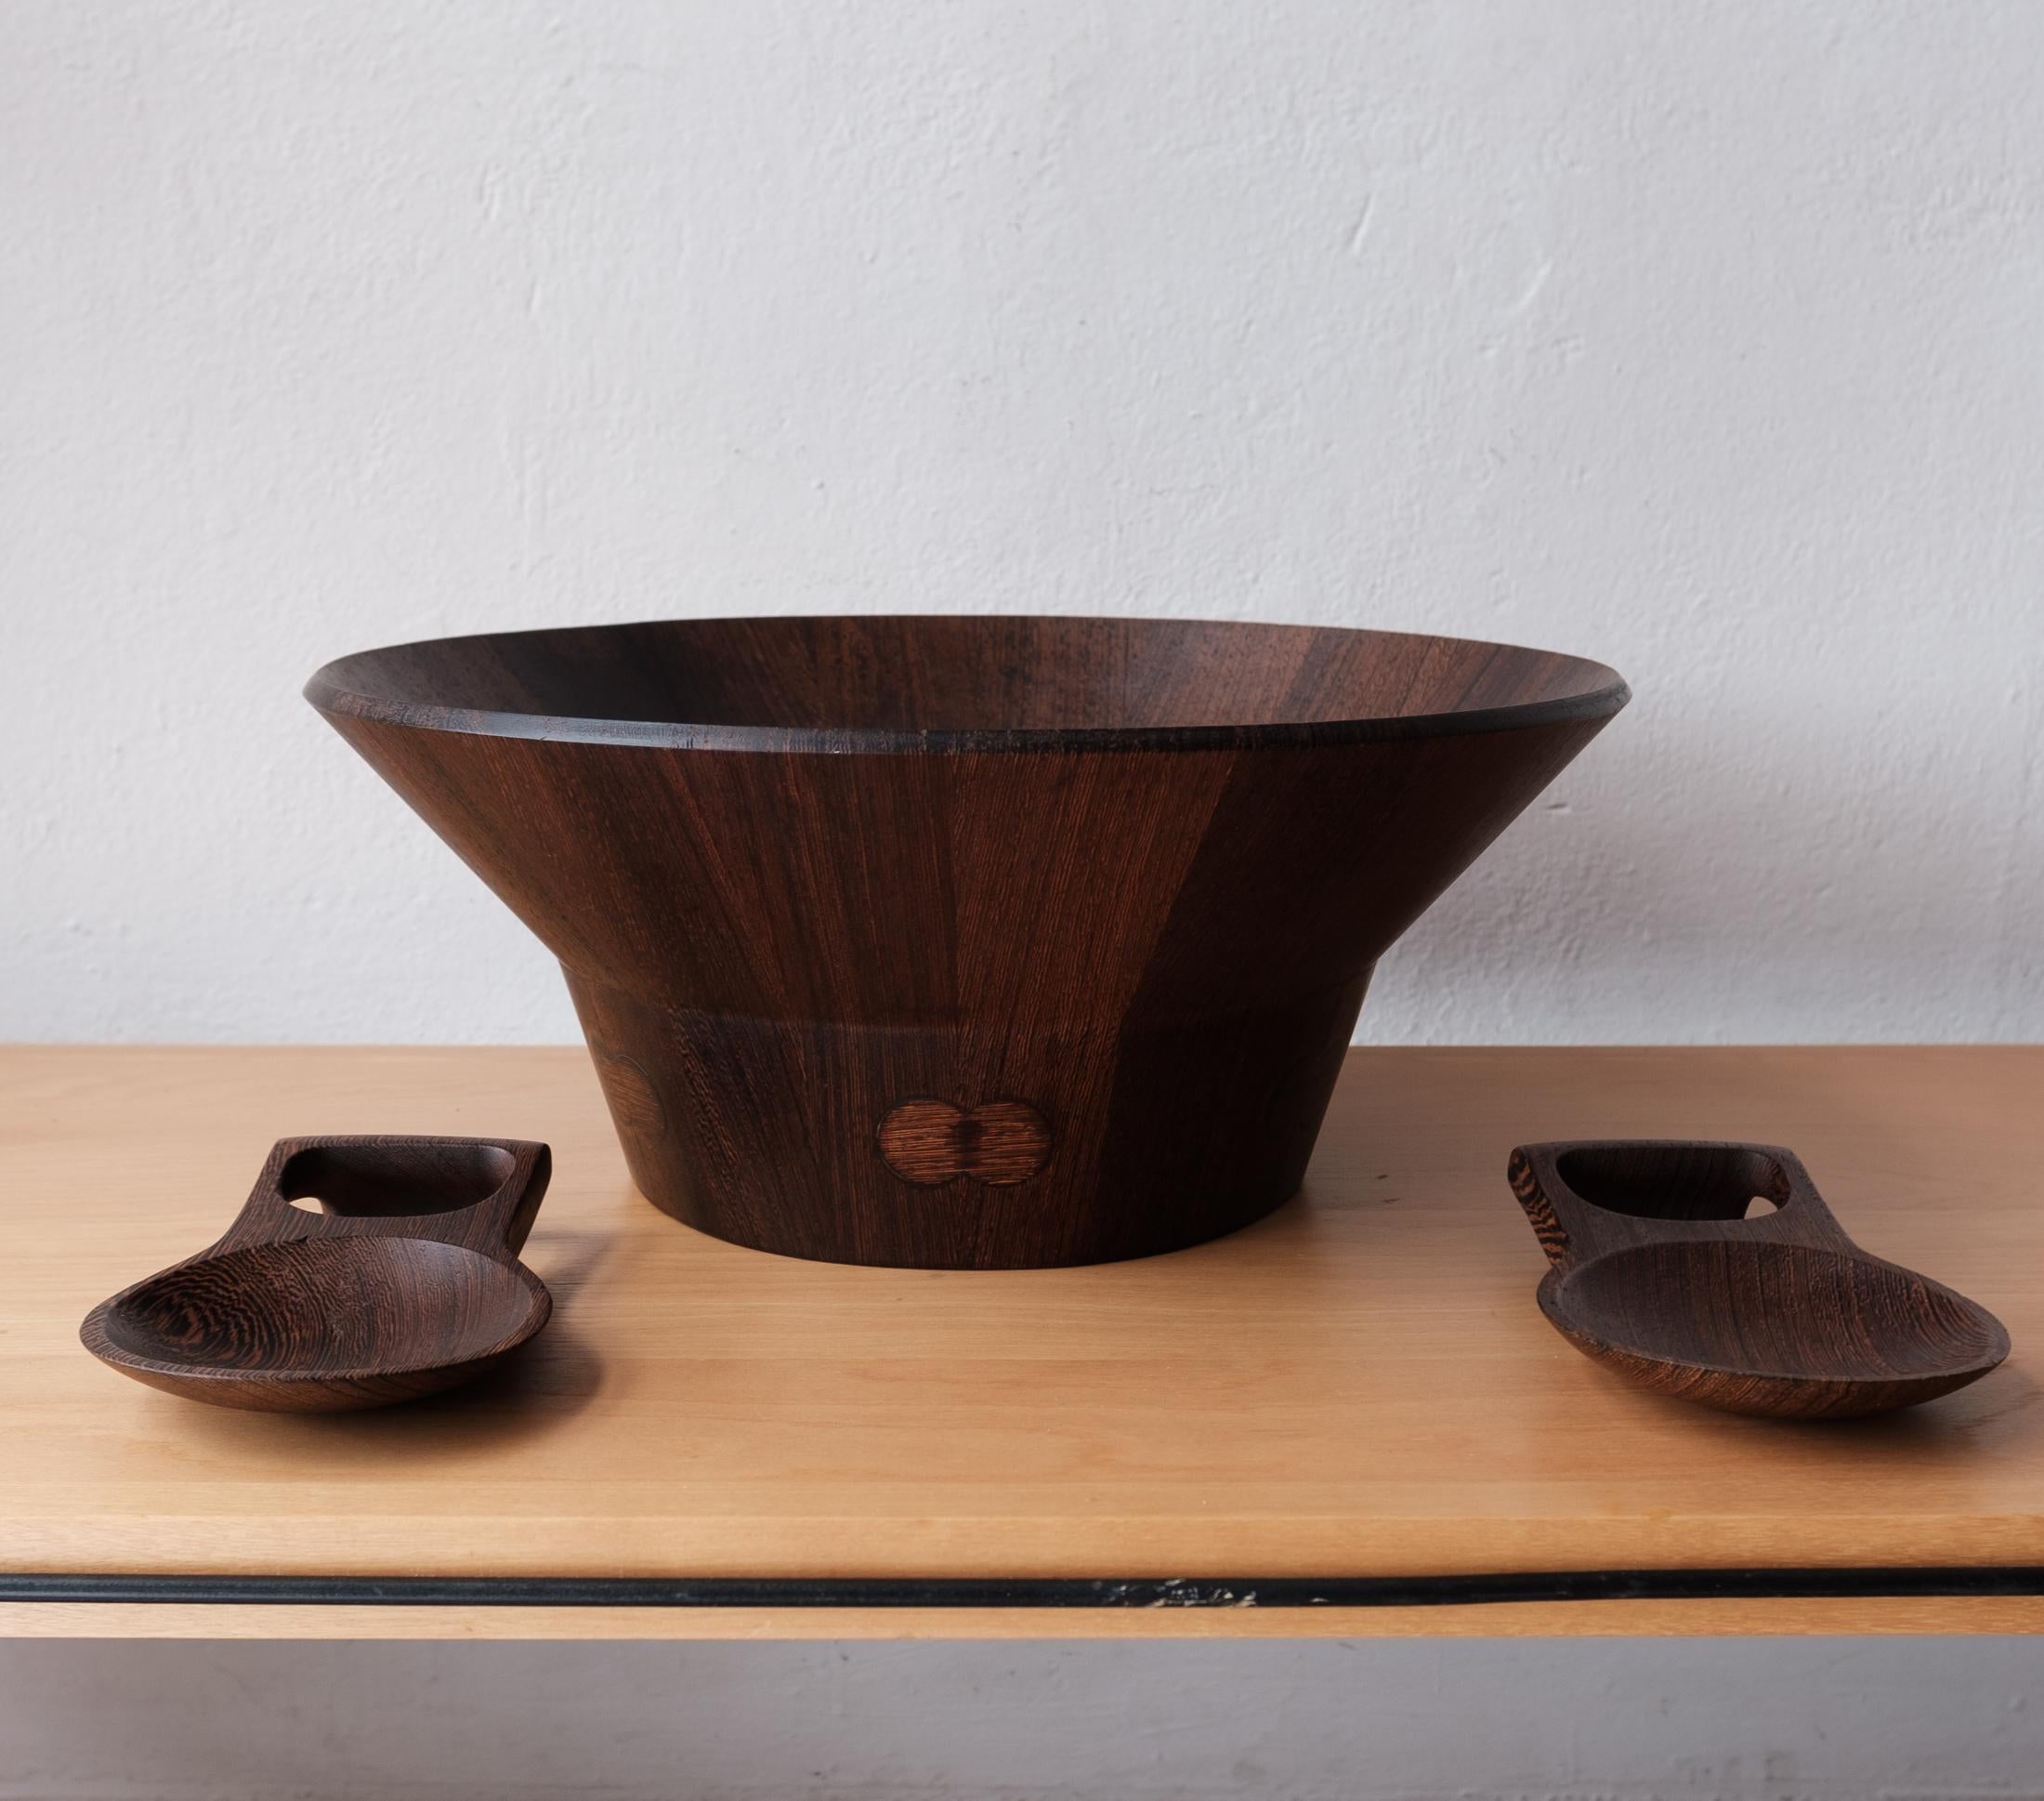 Large and rare salad bowl and tongs designed by Jens Quistgaard for the Dansk rare woods line. Introduced in 1961, the Rare Woods line was the finest designs and materials. 

Dansk described them:
Good design grows out of its materials, no matter